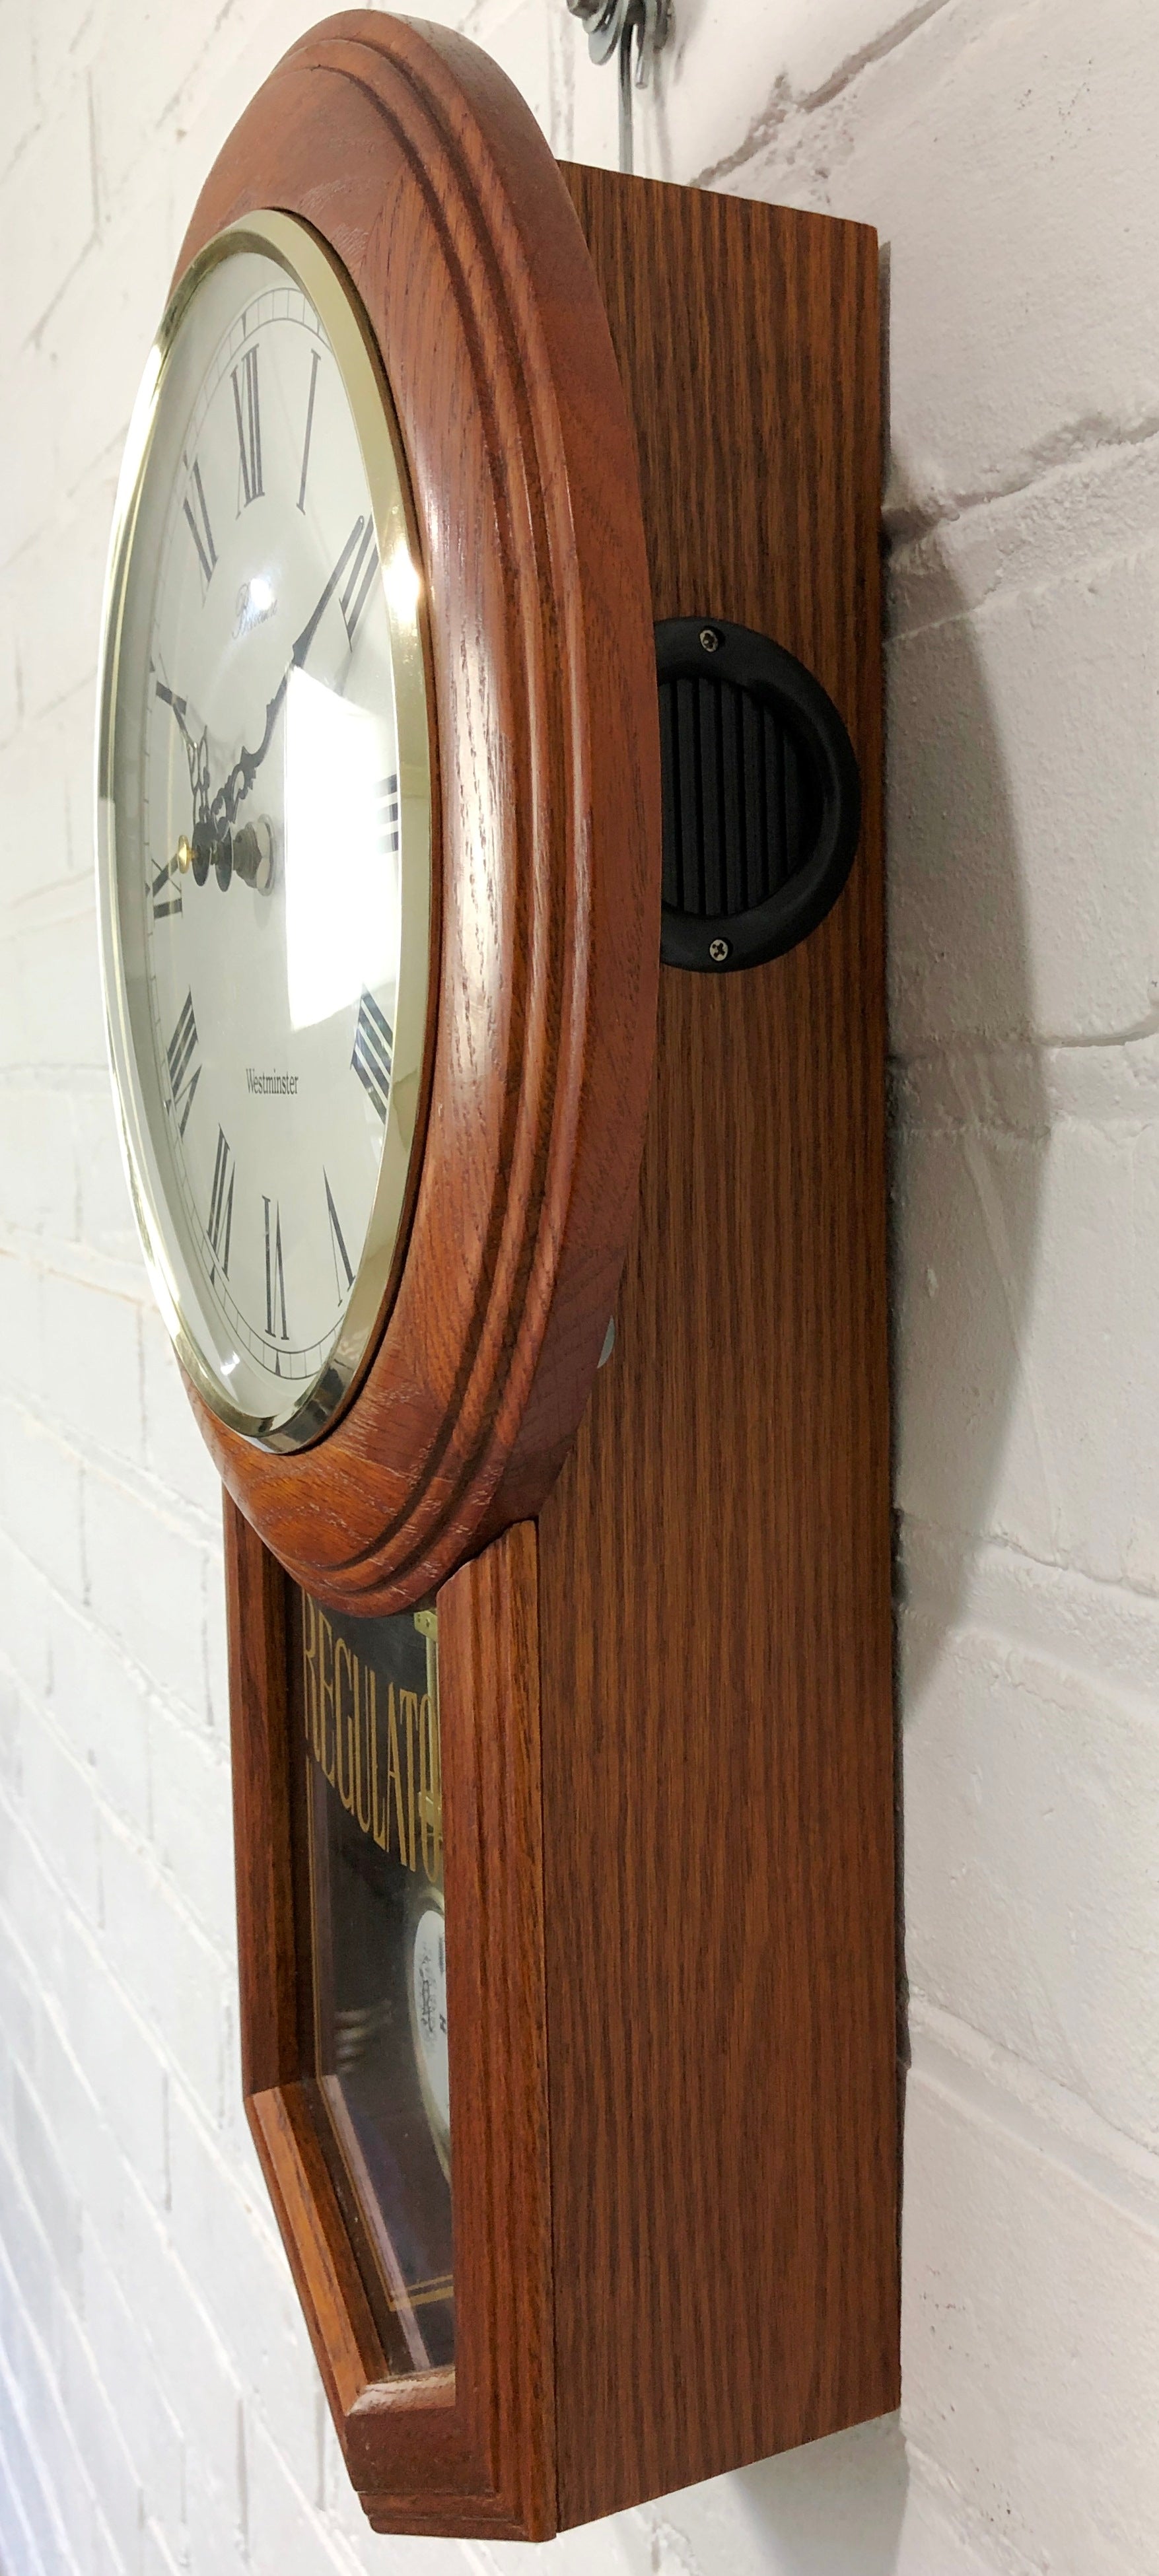 Vintage Westminster Musical Chime Regulator Battery Wall Clock | eXibit collection